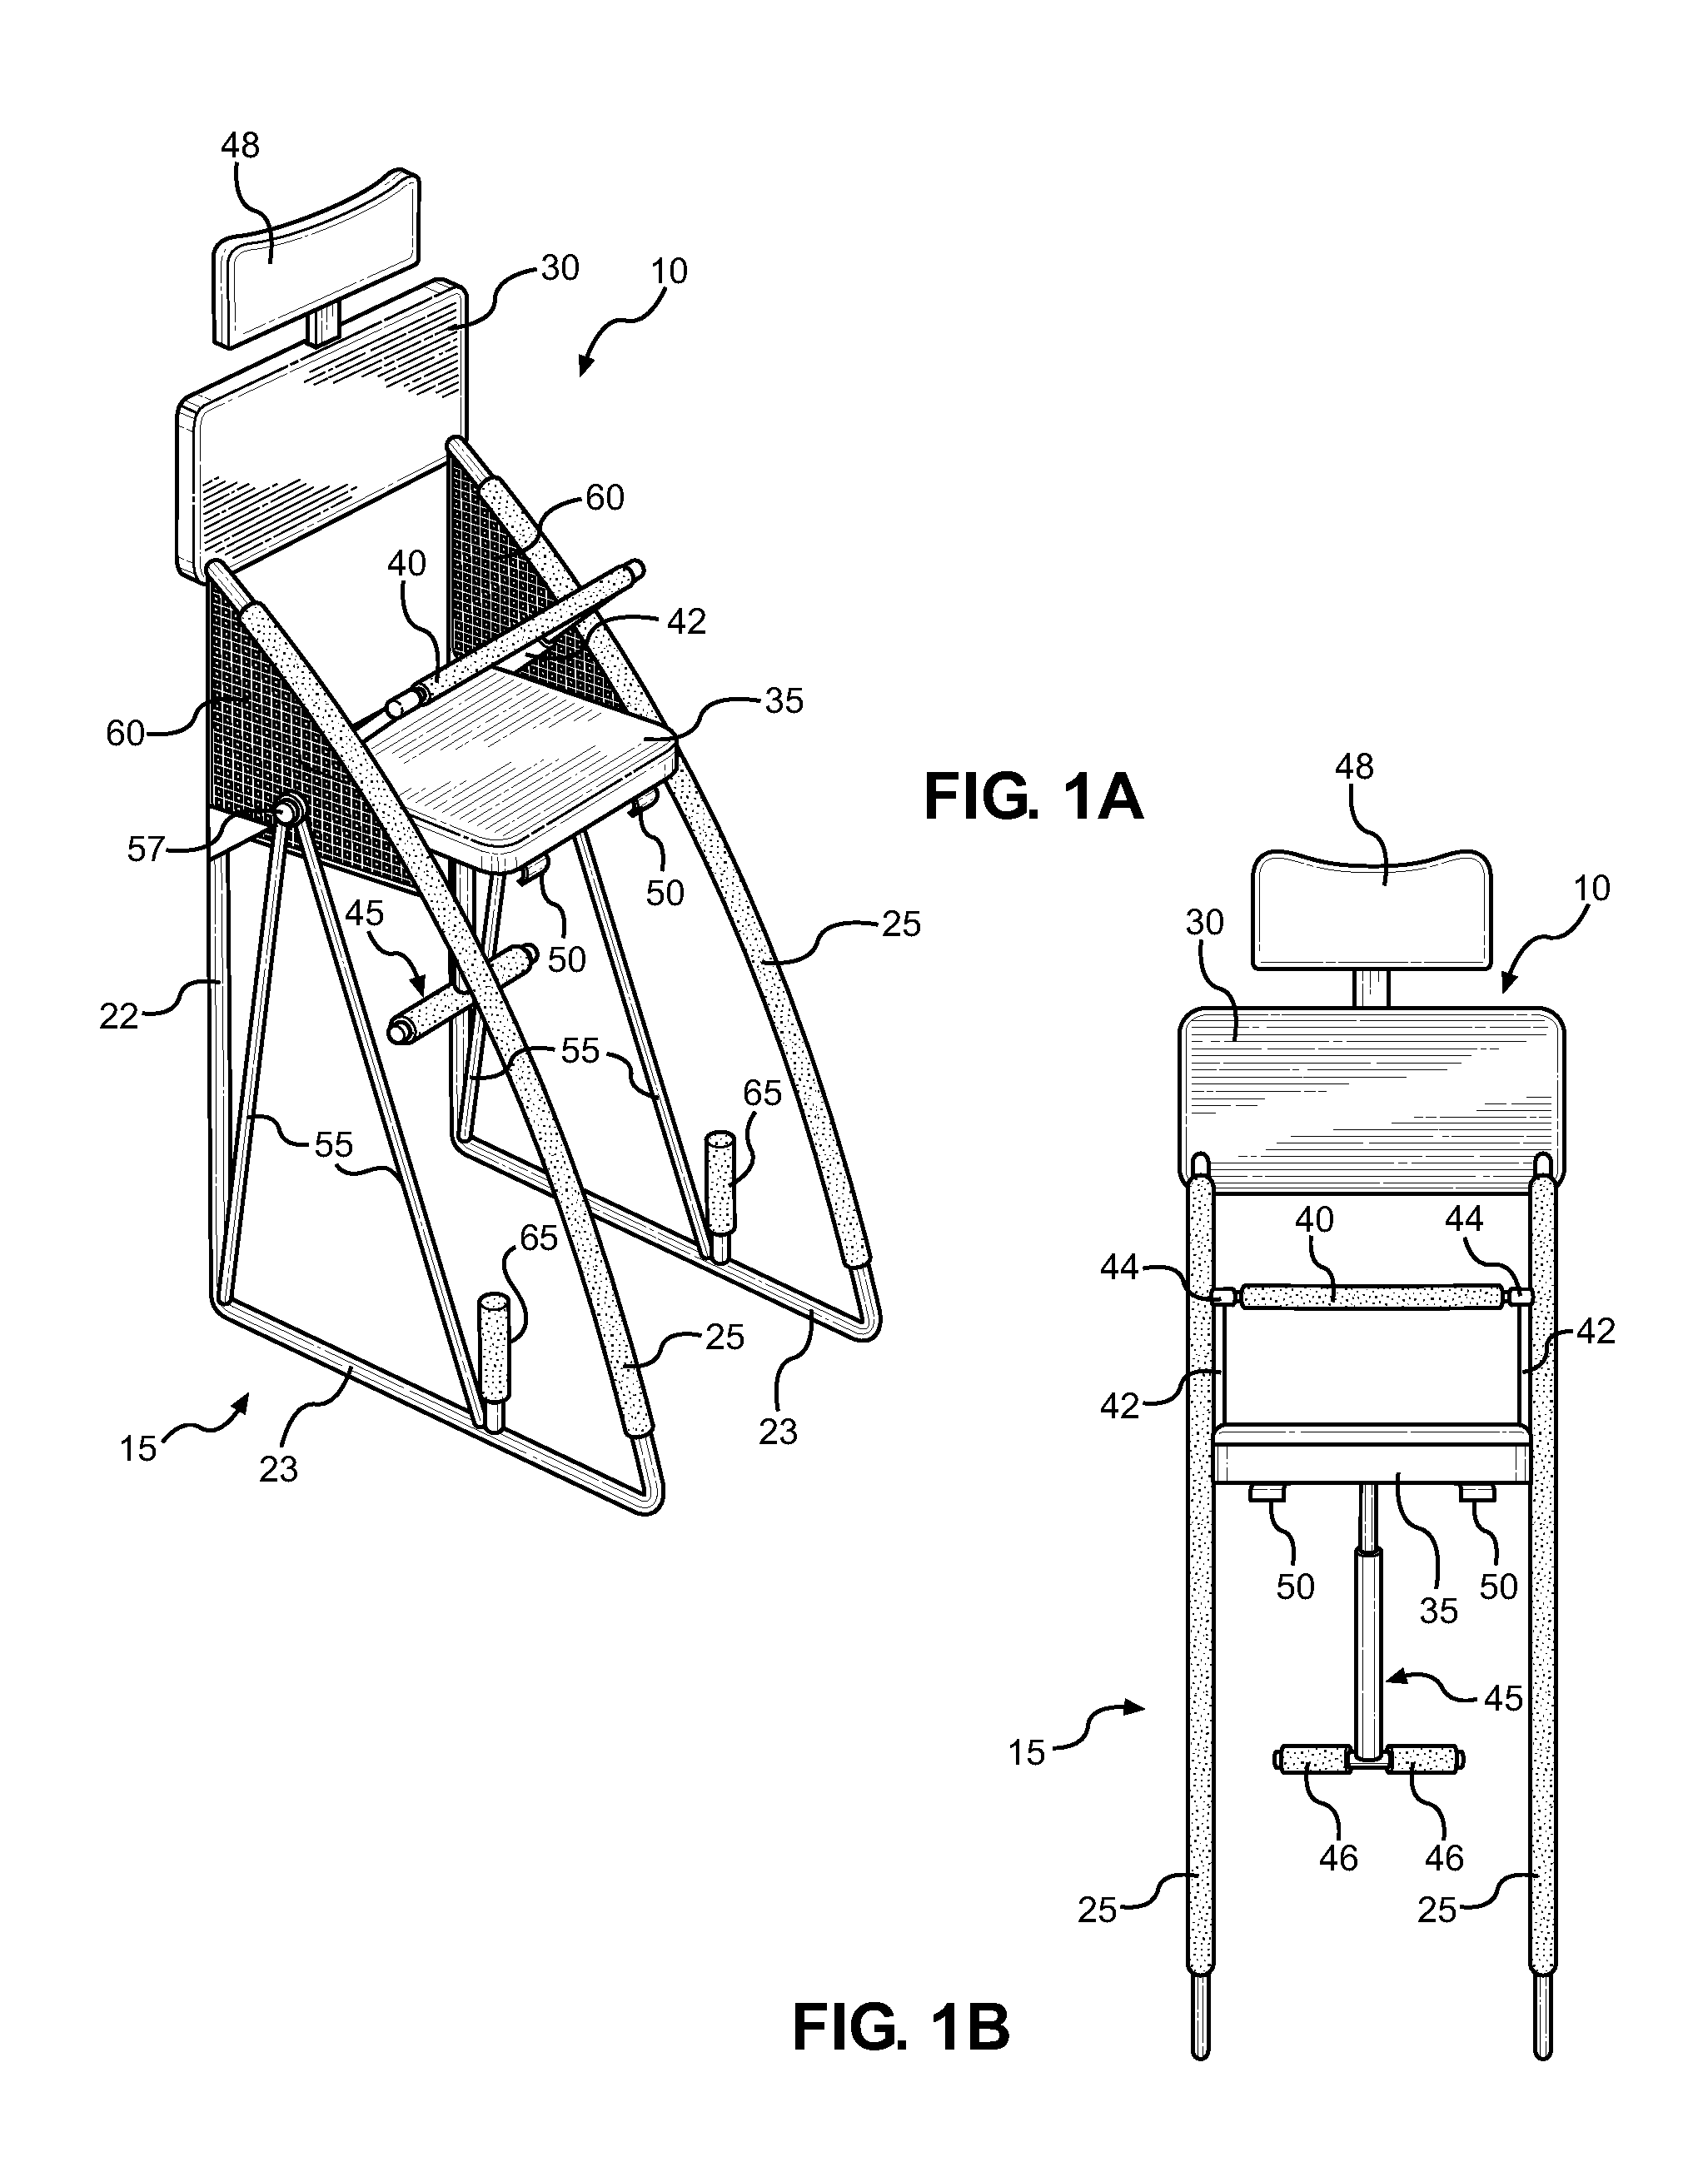 Seated Inversion Chair and Method of Treating Migraine Headaches